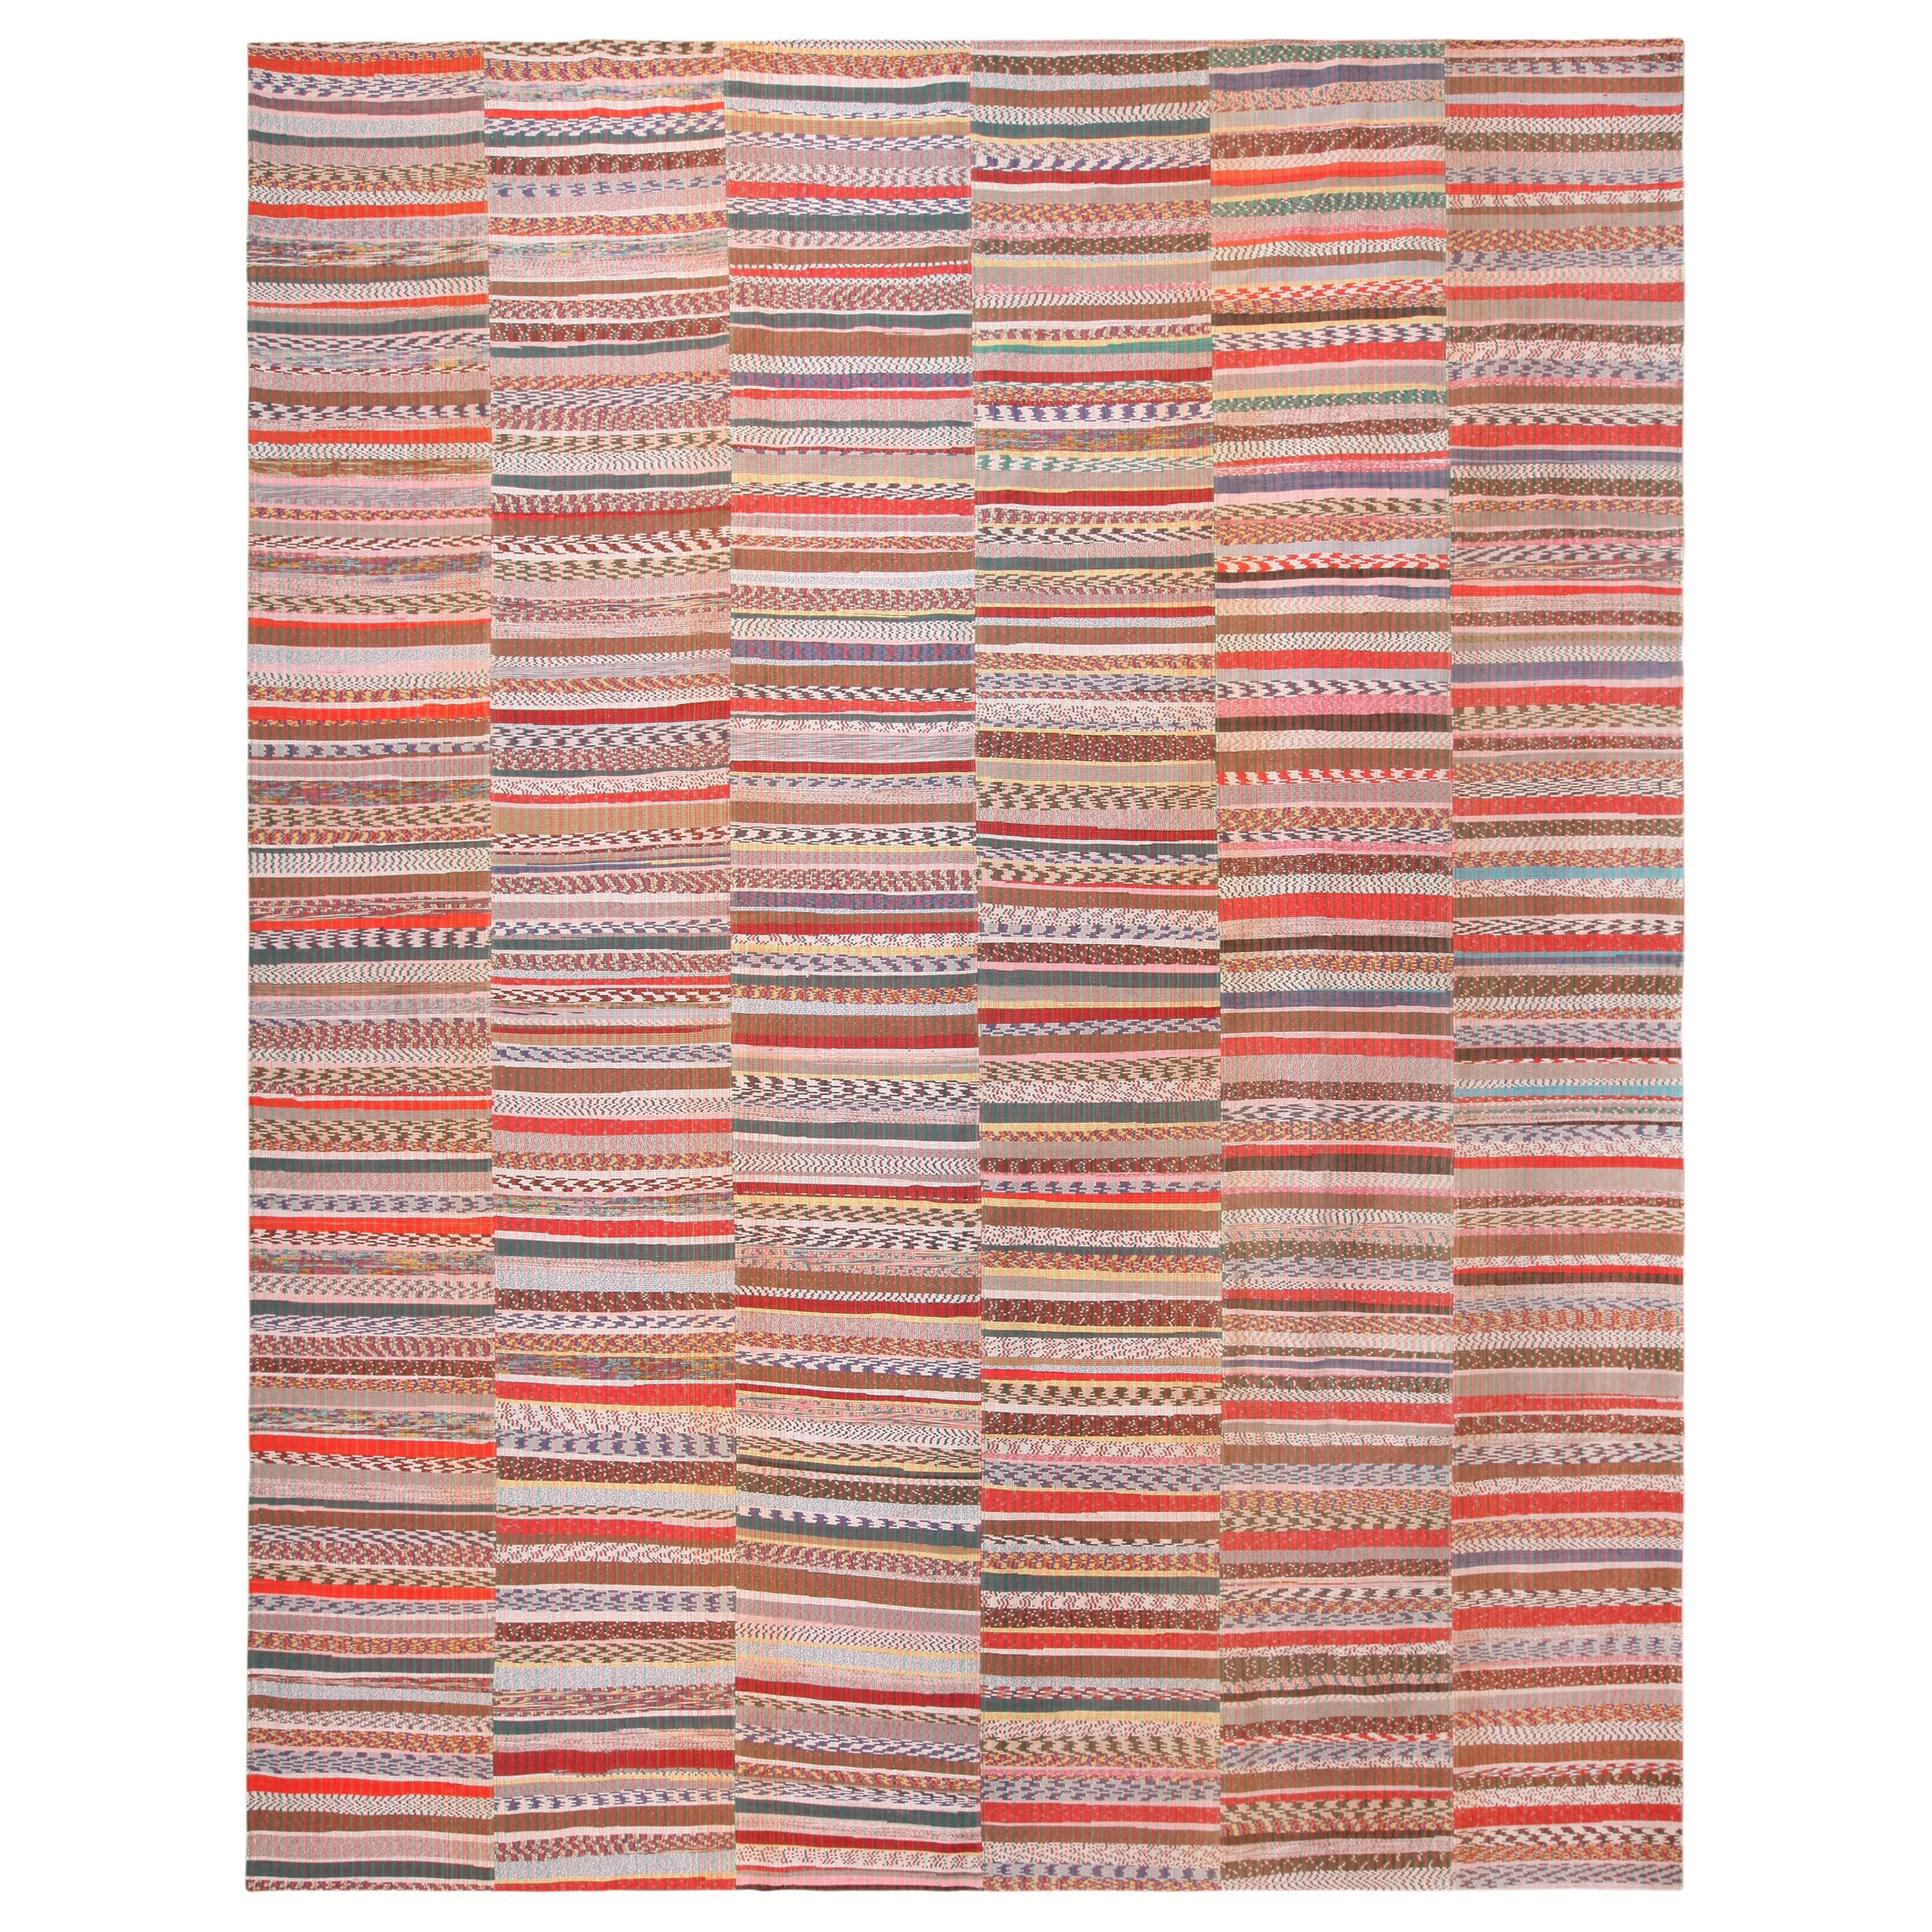 Nazmiyal Collection Stripped Modern Rag Rug. 12 ft 10 in x 16 ft 2 in For Sale